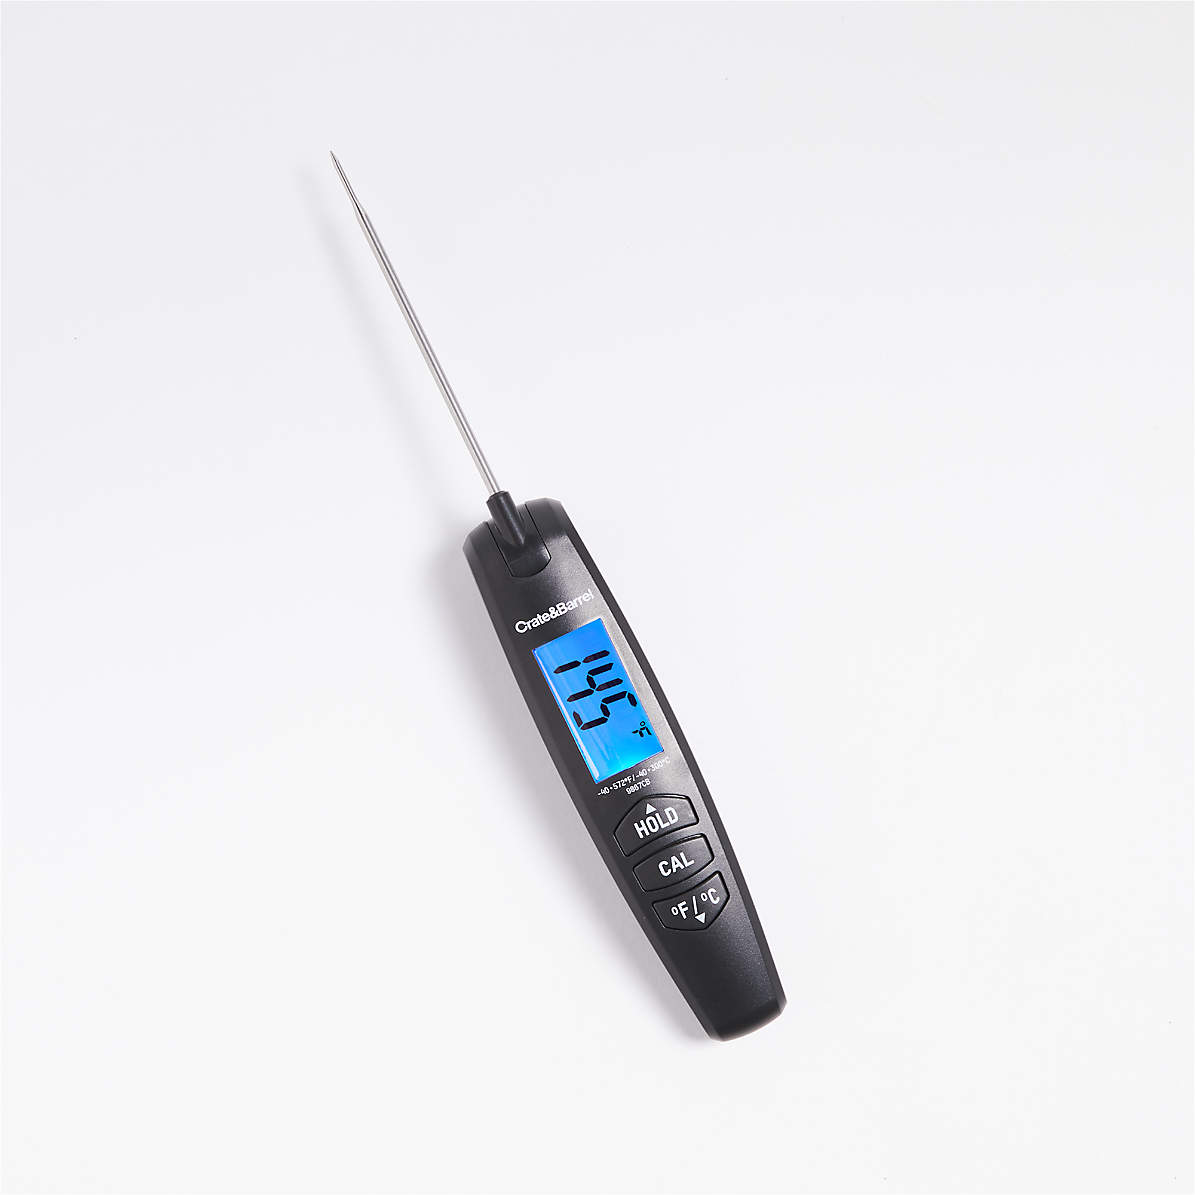 Crate & Barrel by Taylor Analog Leave-In Meat Thermometer + Reviews